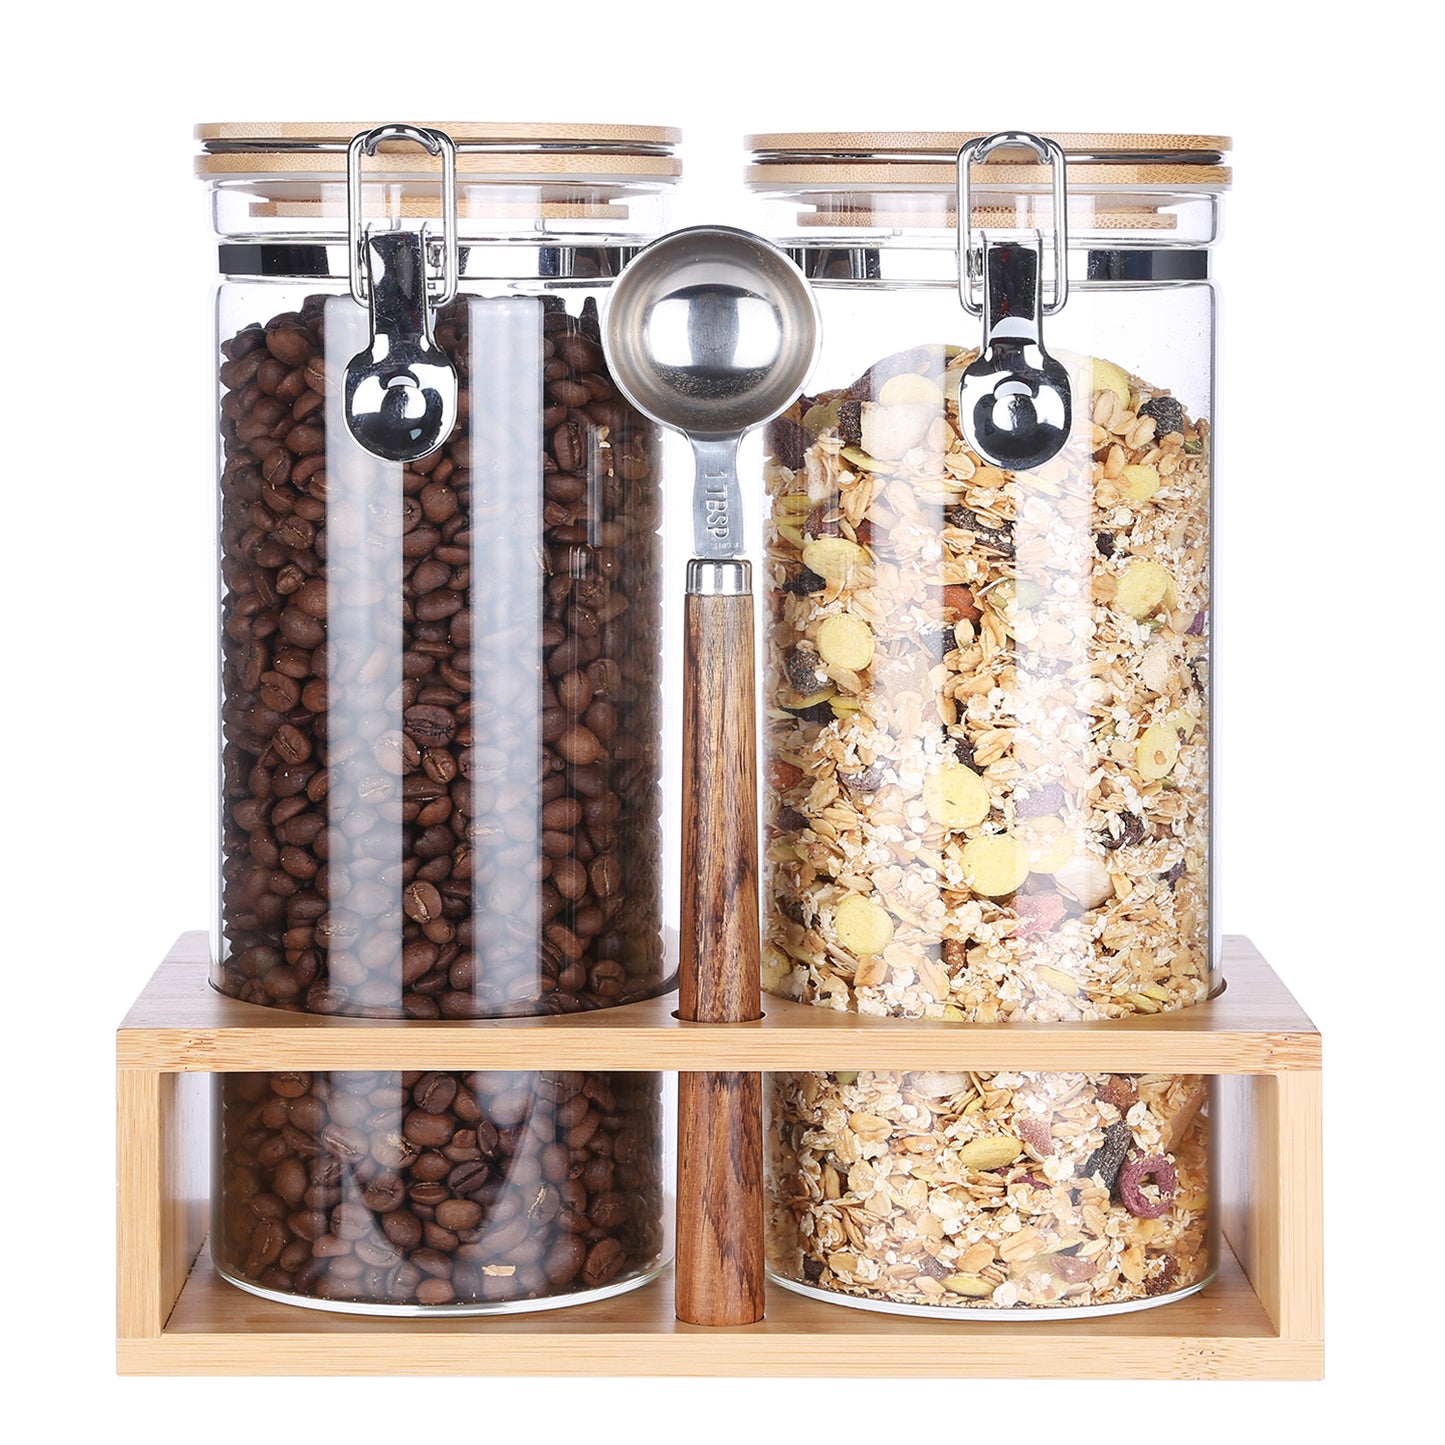 KKC Tall Glass Jar with Airtight Hinged Lid,Sealed Glass Containers with Scoop for Coffee Bean,Ground Coffee,Brown Sugar,Nuts,Oatmeal,Pasta,Cereal,Coffee Canister with Spoon for Coffee Bar,54 Fluid-oz